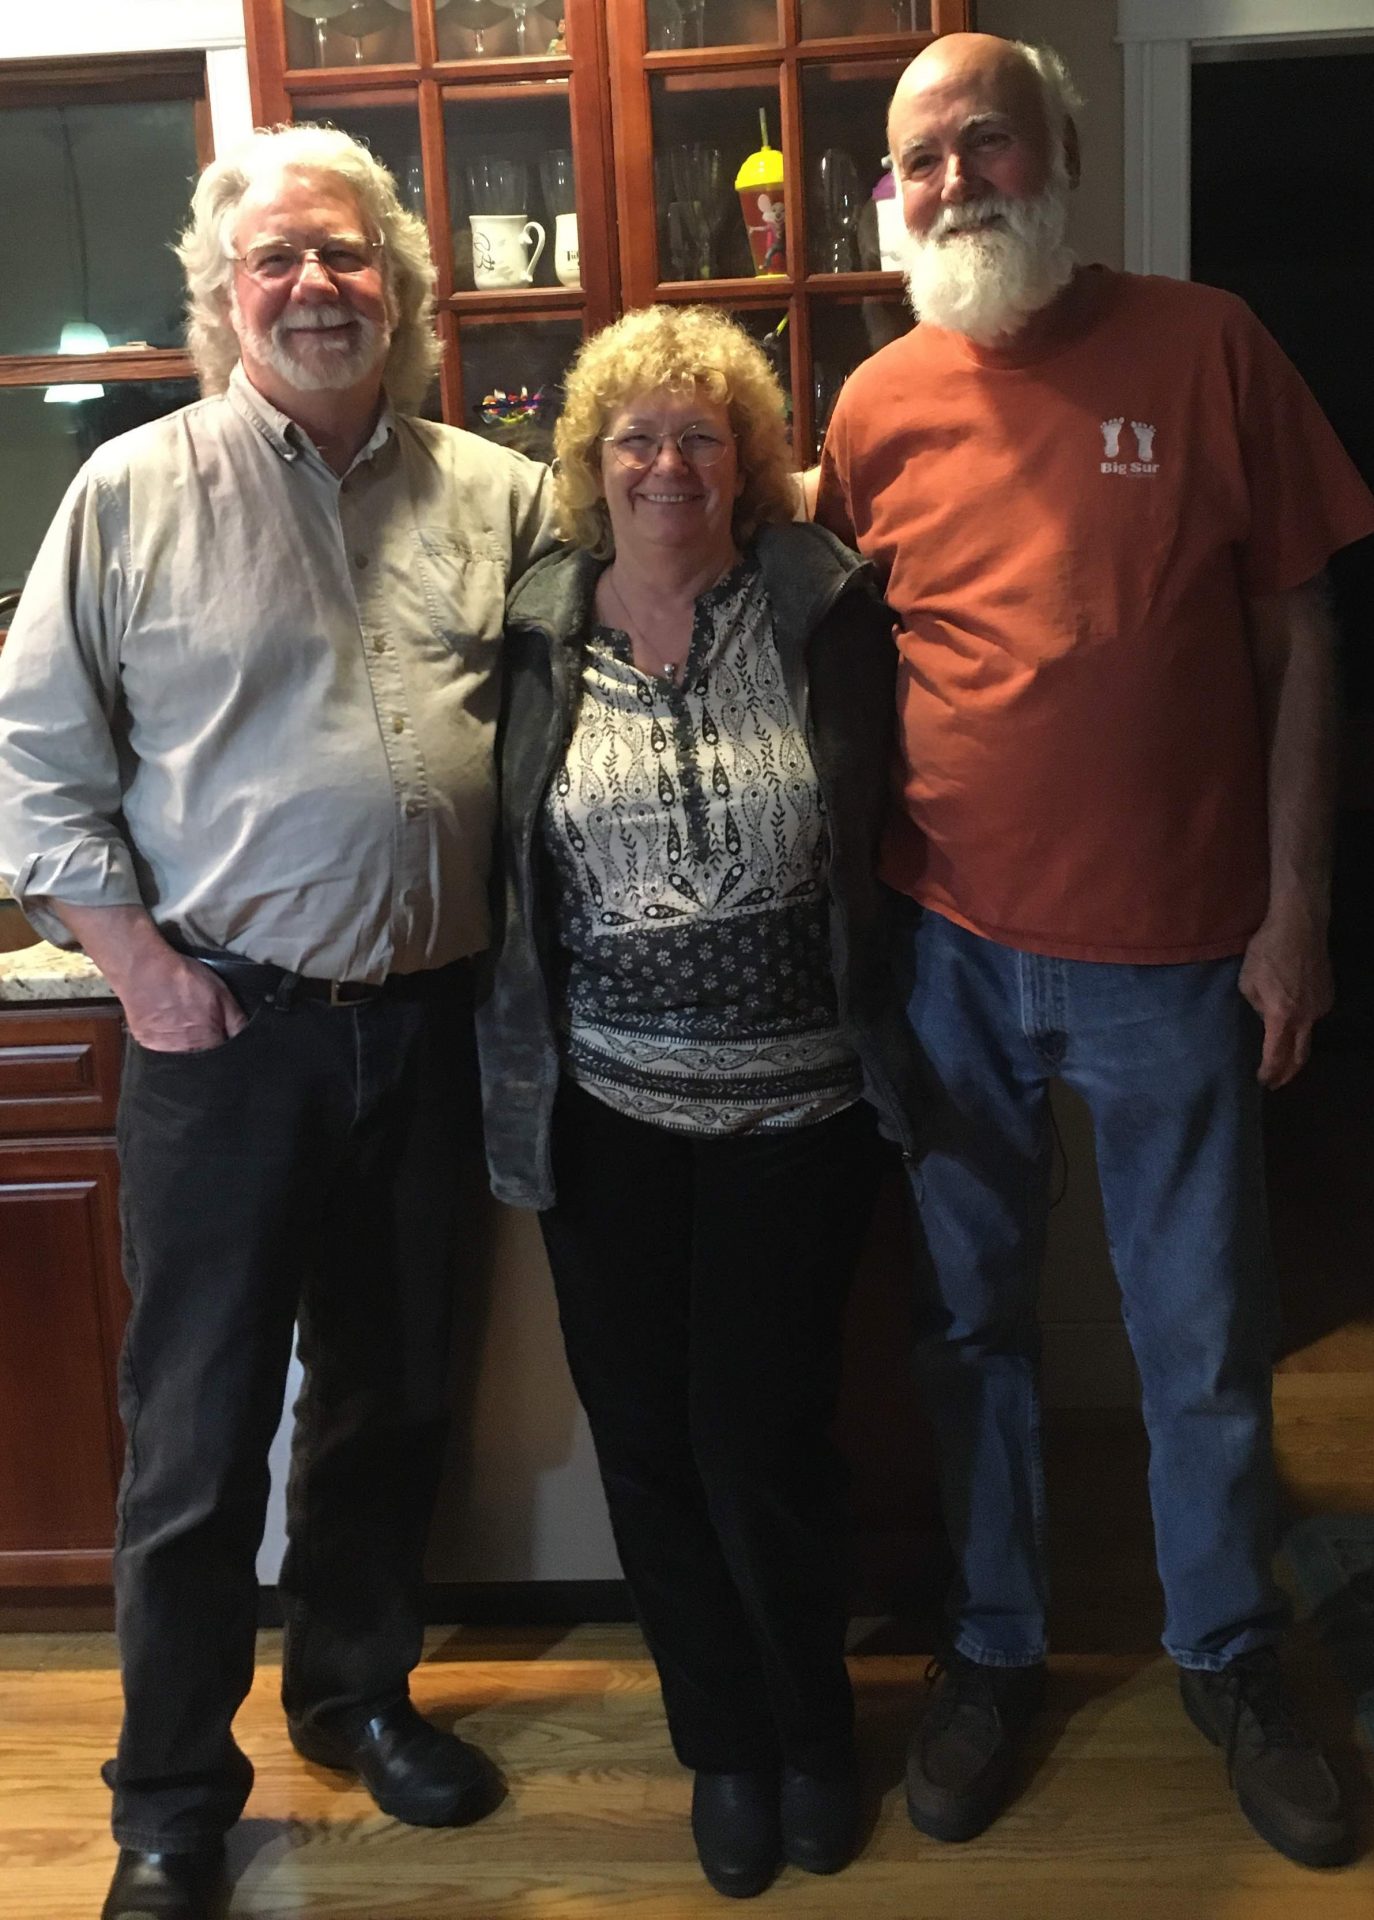 Bob Rial, Lorie Cunningham & Dave Duncan, New Jersey, October 22, 2019